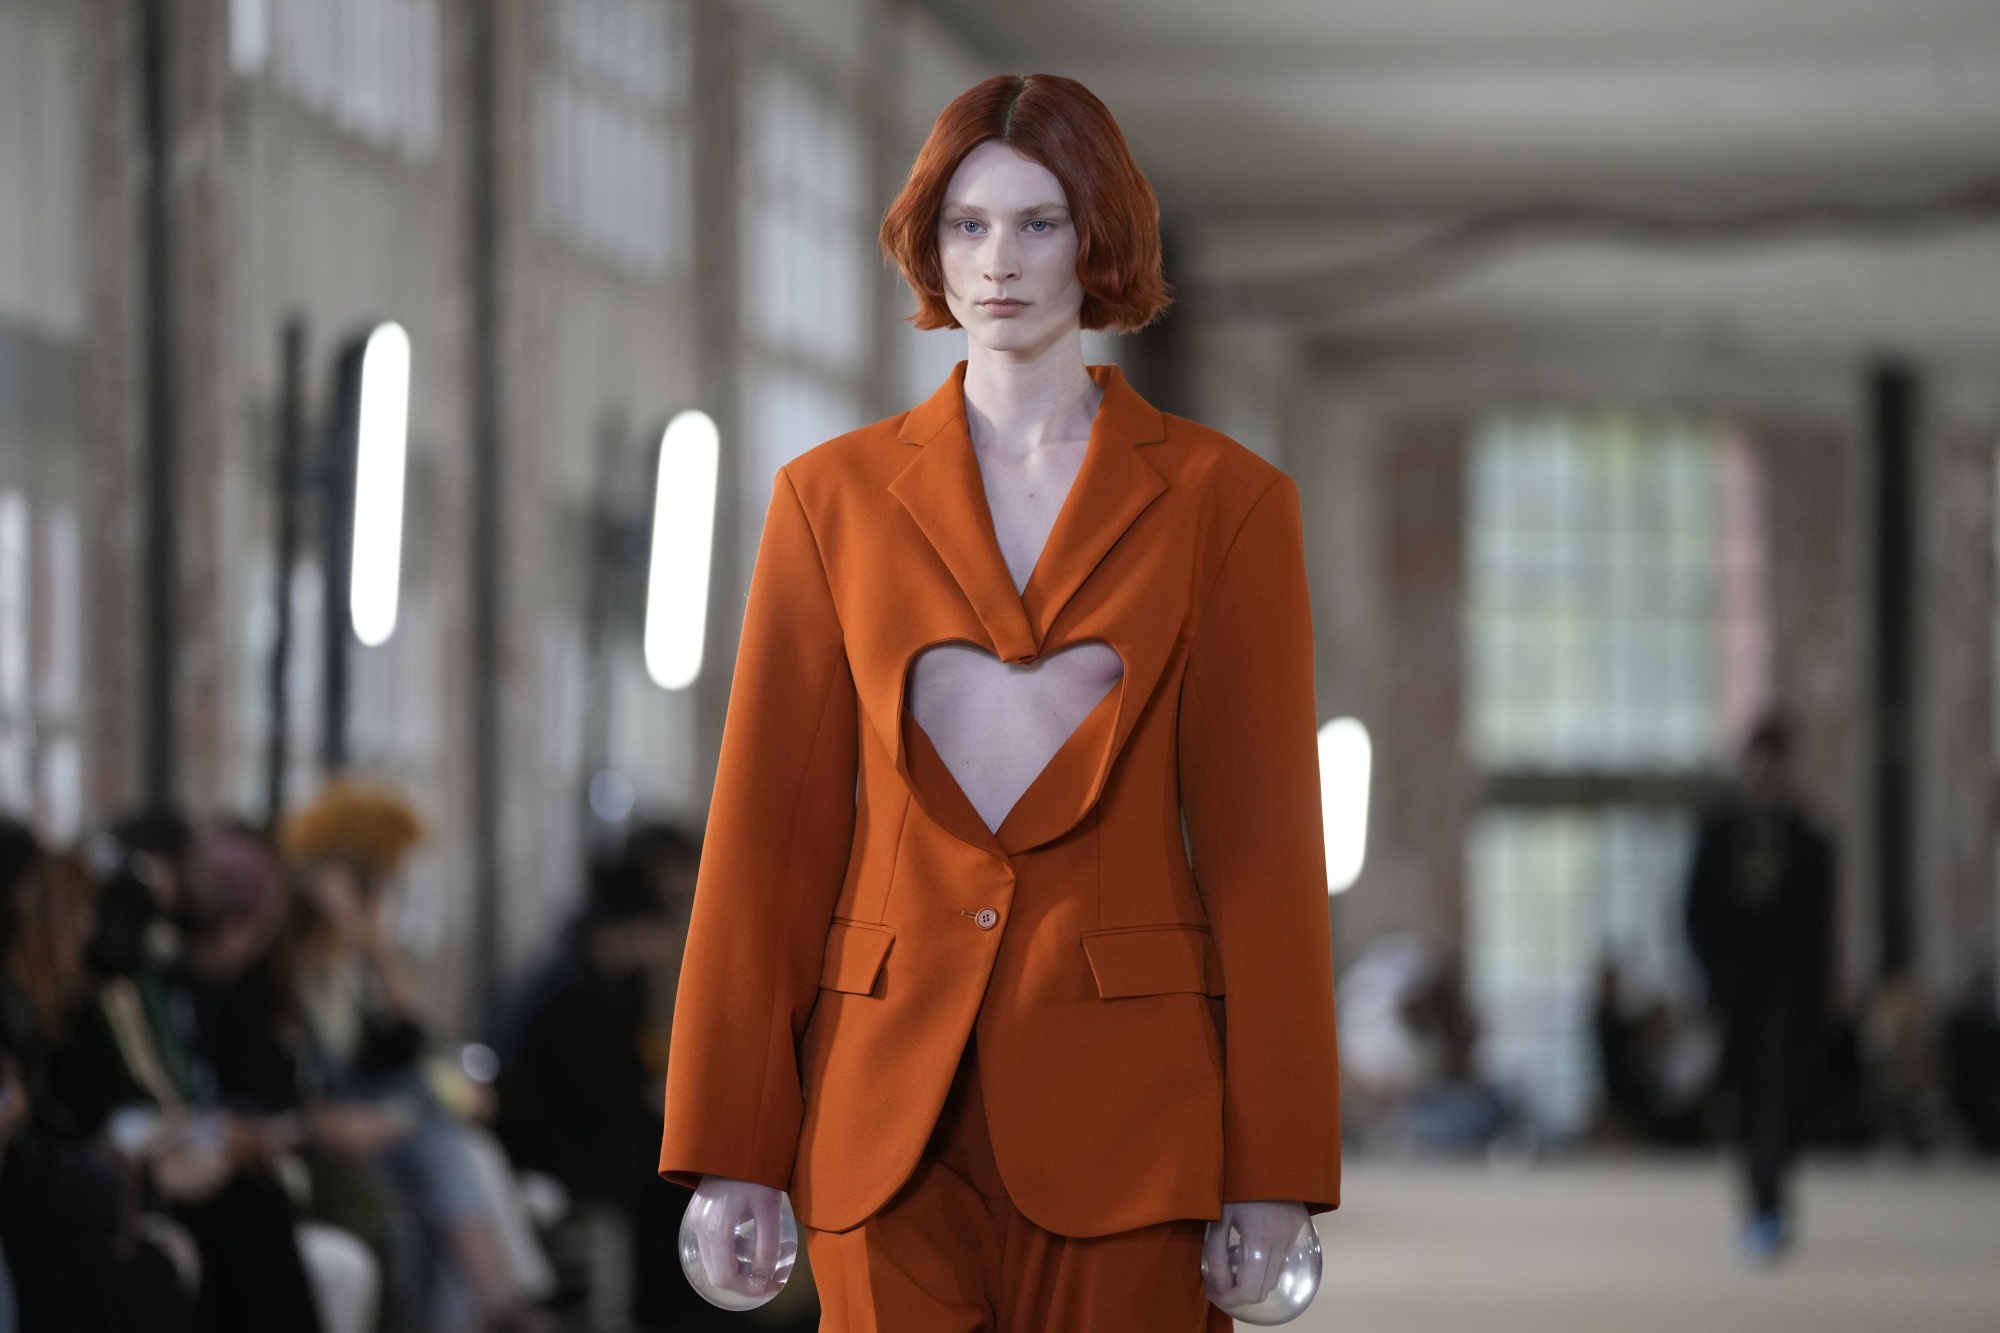 Paris Fashion Week Will Return With IRL Shows This September